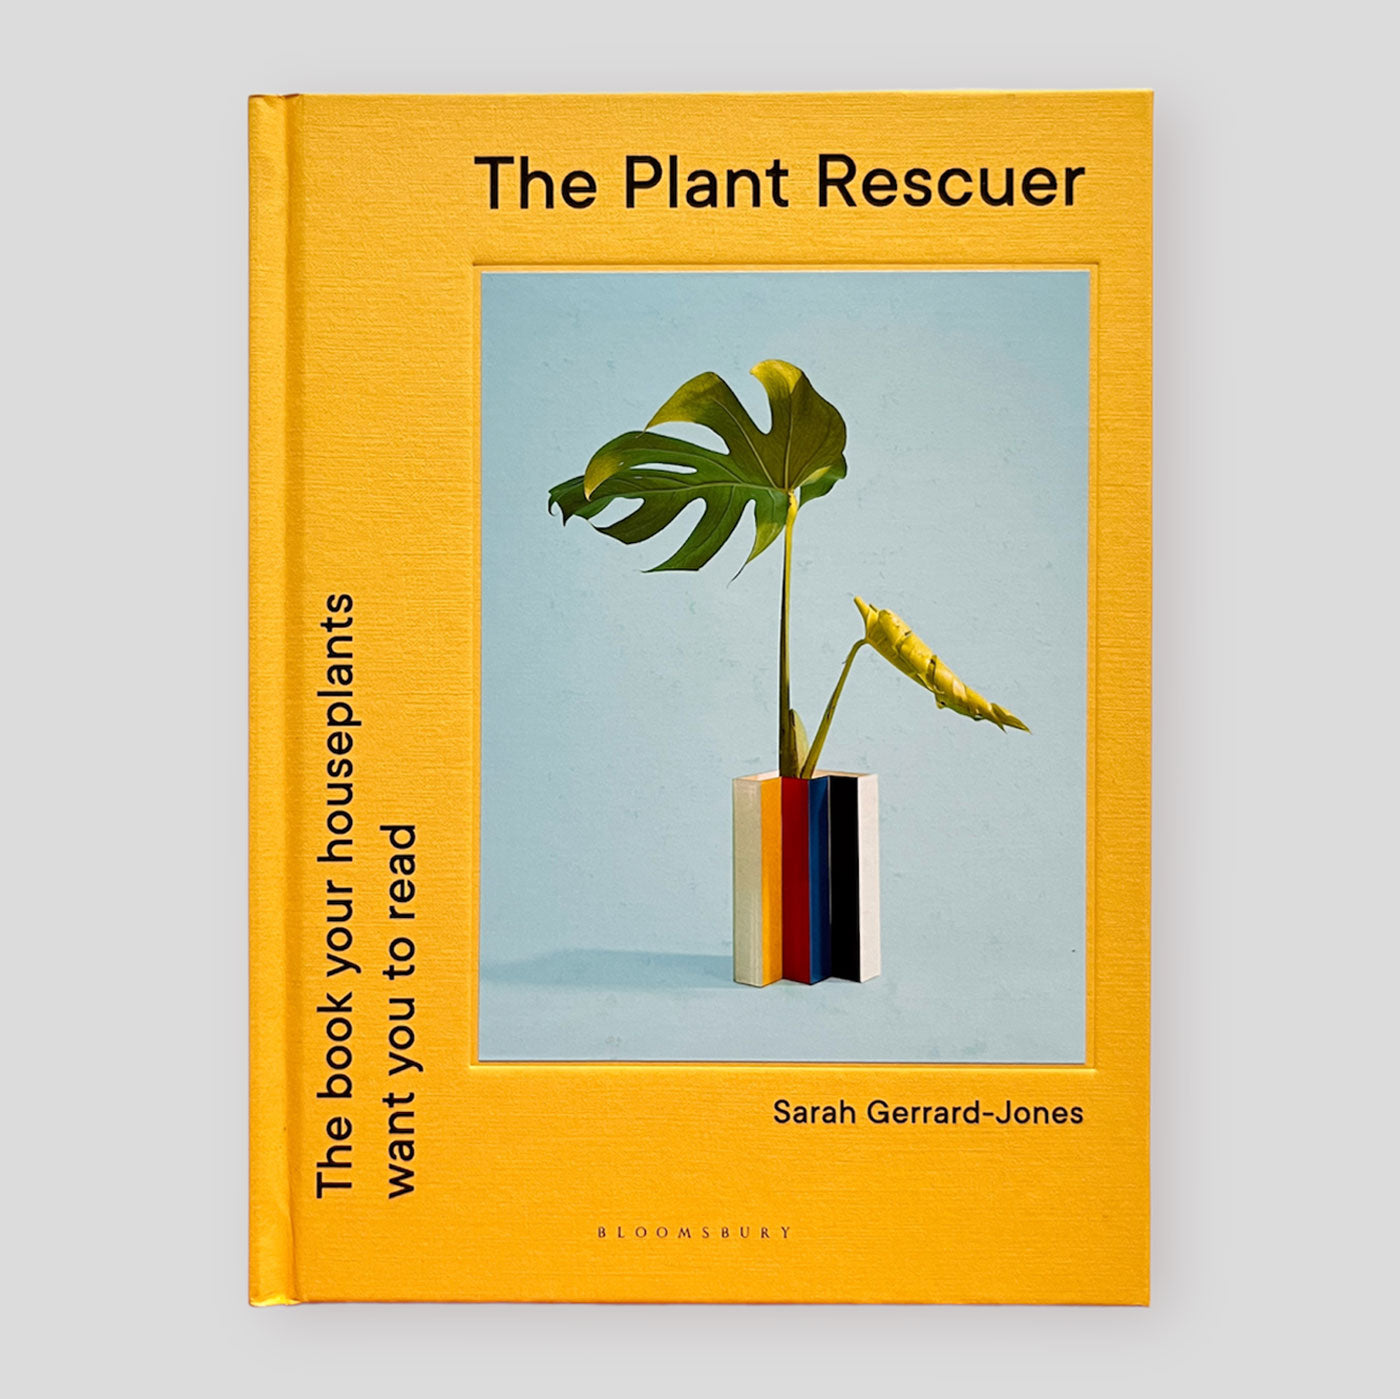 The Plant Rescuer: The Book Your Houseplants Want You to Read | Sarah Gerrard-Jones (Author)